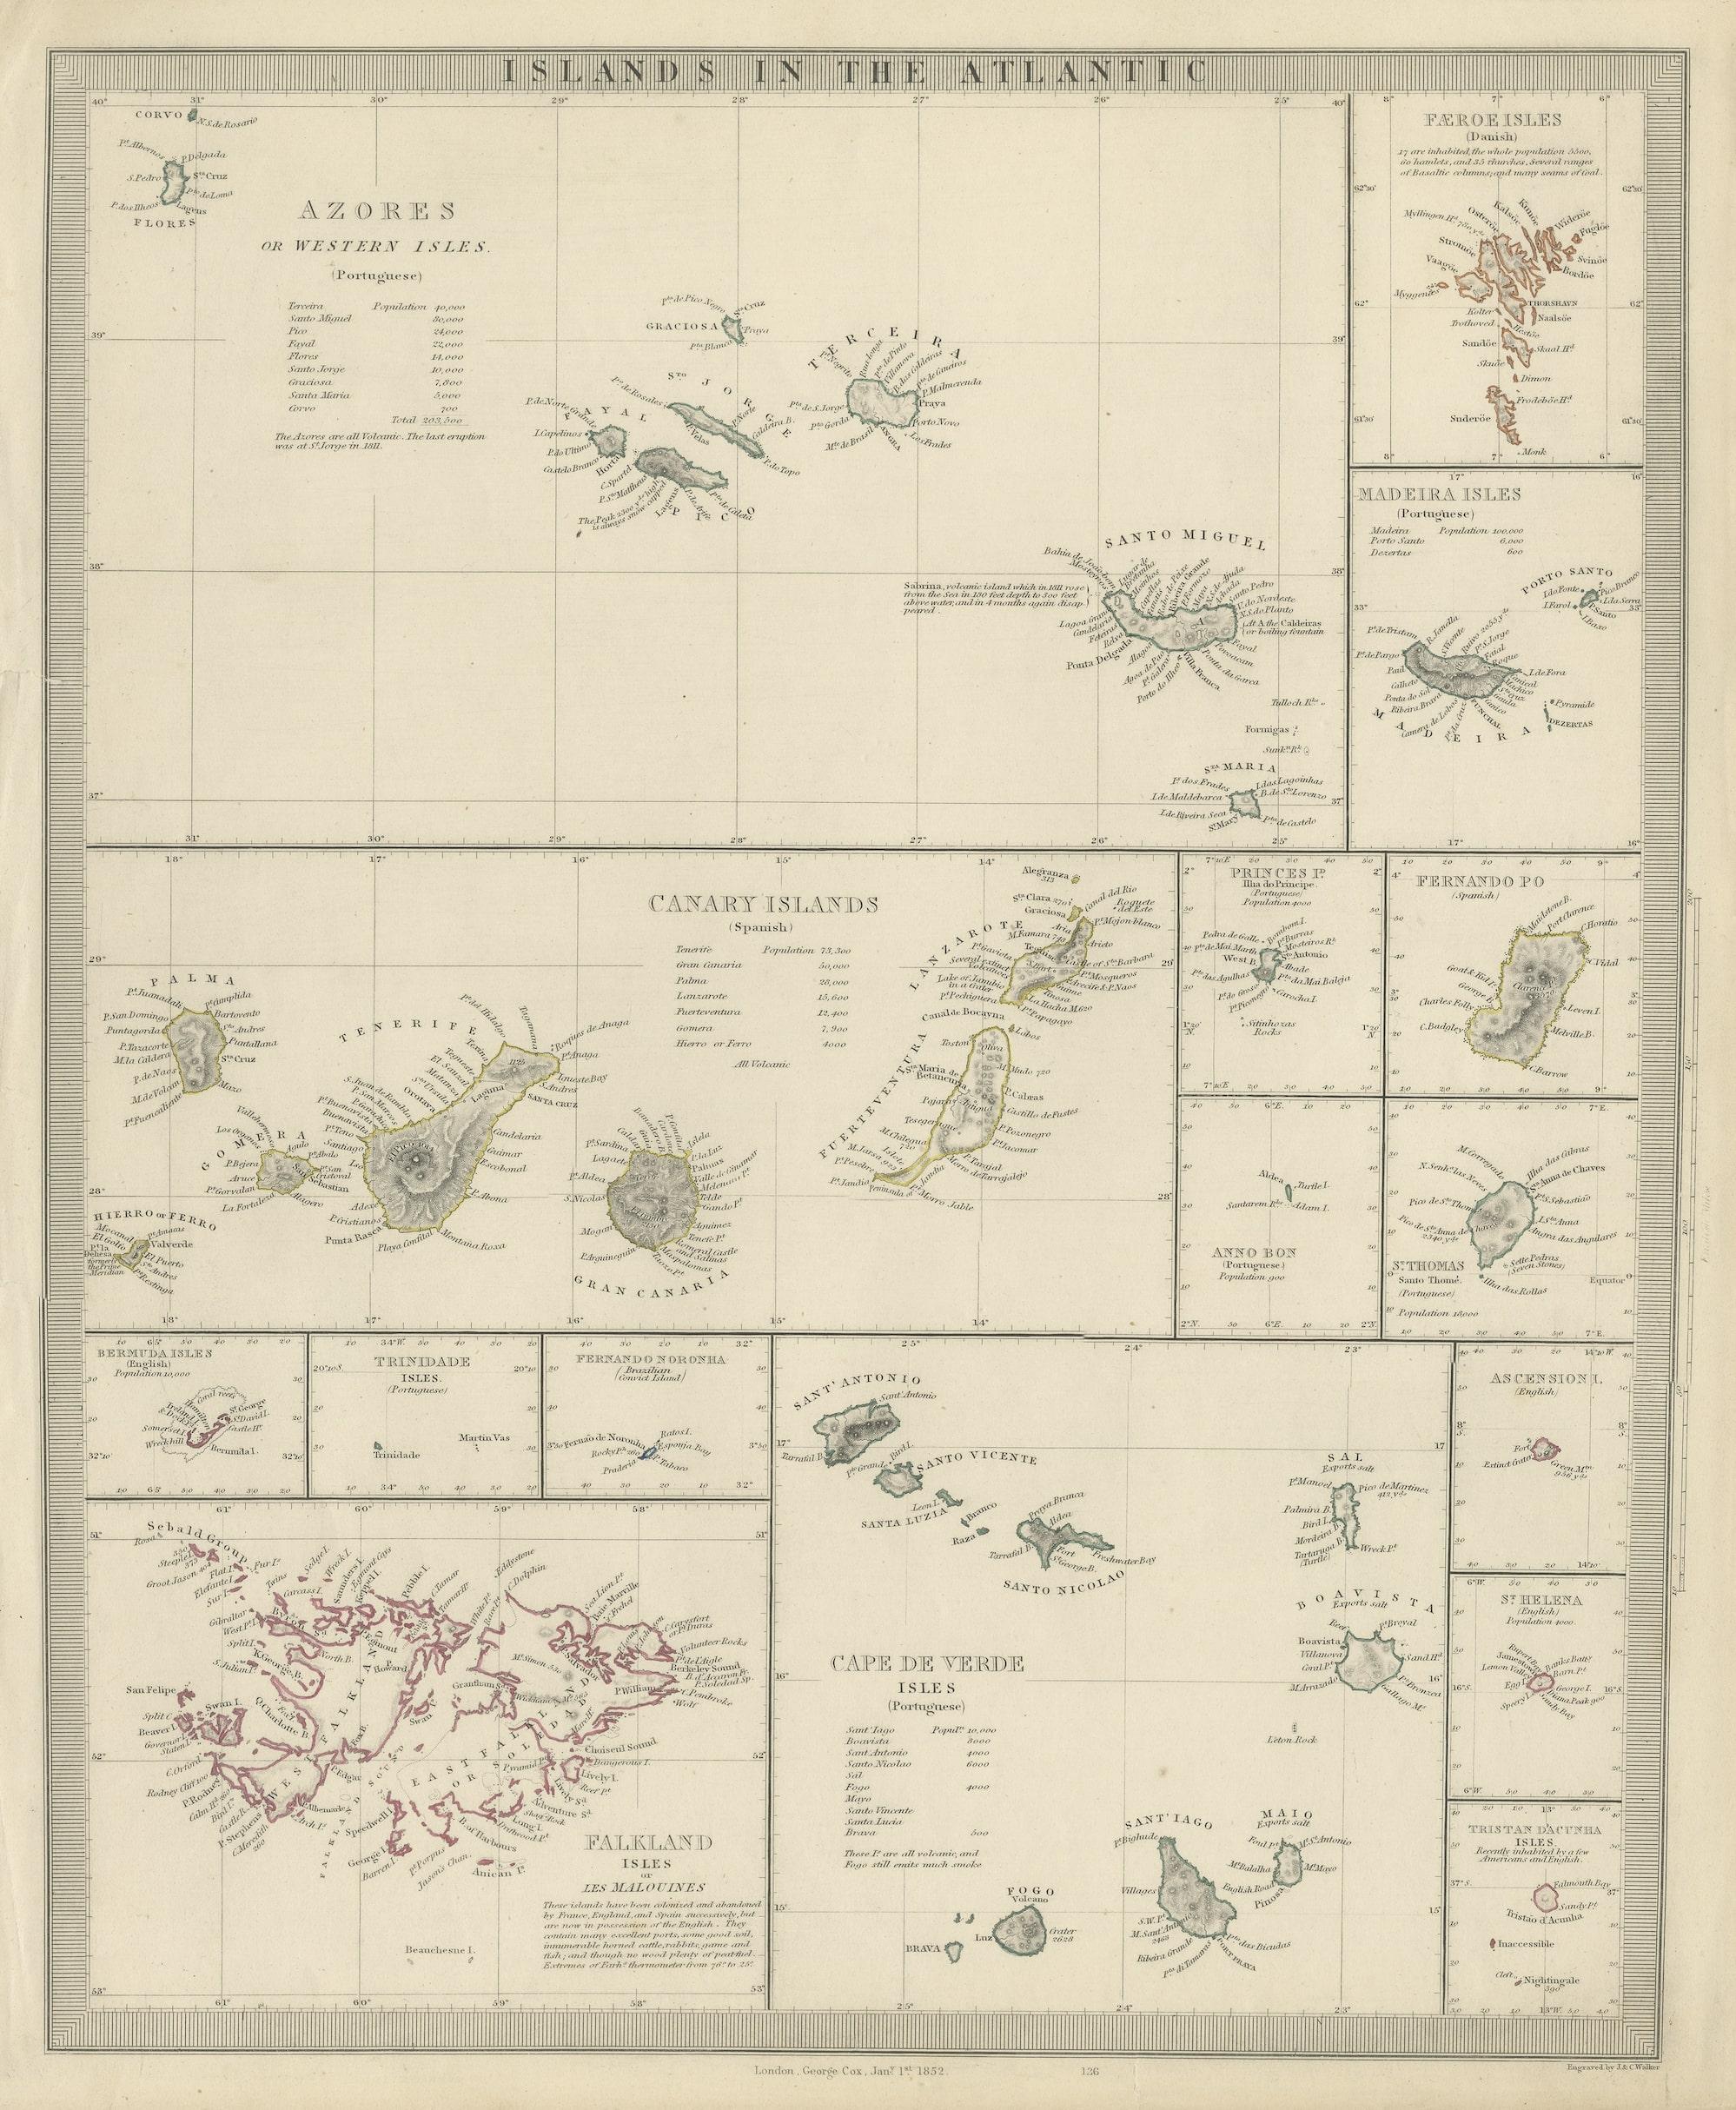 Antique map titled 'Islands in the Atlantic'. Steel engraved map of the islands in the Atlantic Ocean. It shows 16 individual maps on one sheet. Covers the Azores or Western Isles, Faeroe Isles, Madeira Isles, Princes Island, Canary Islands,